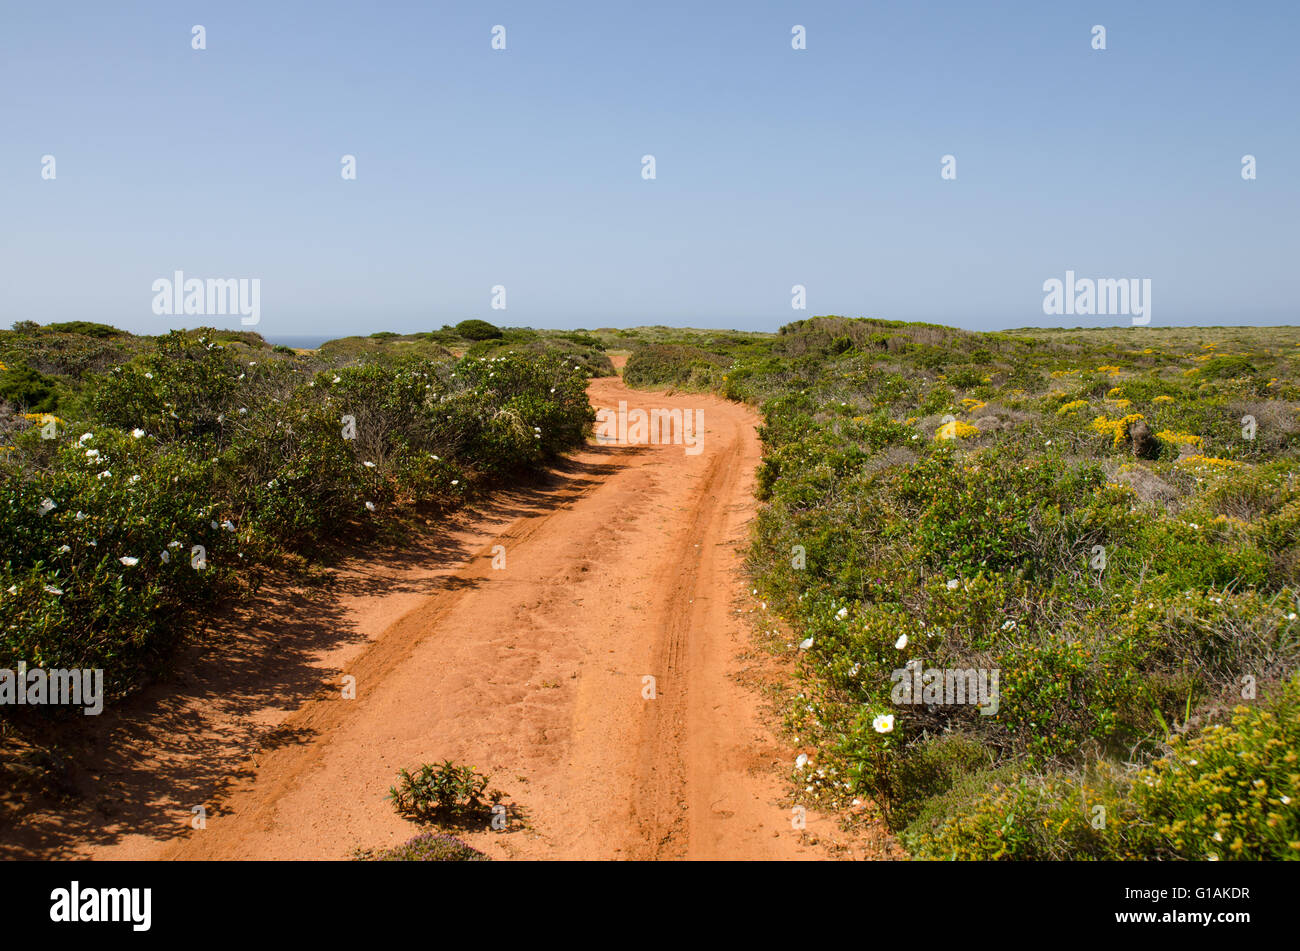 Empty dirt track with red soil in Portugal Stock Photo